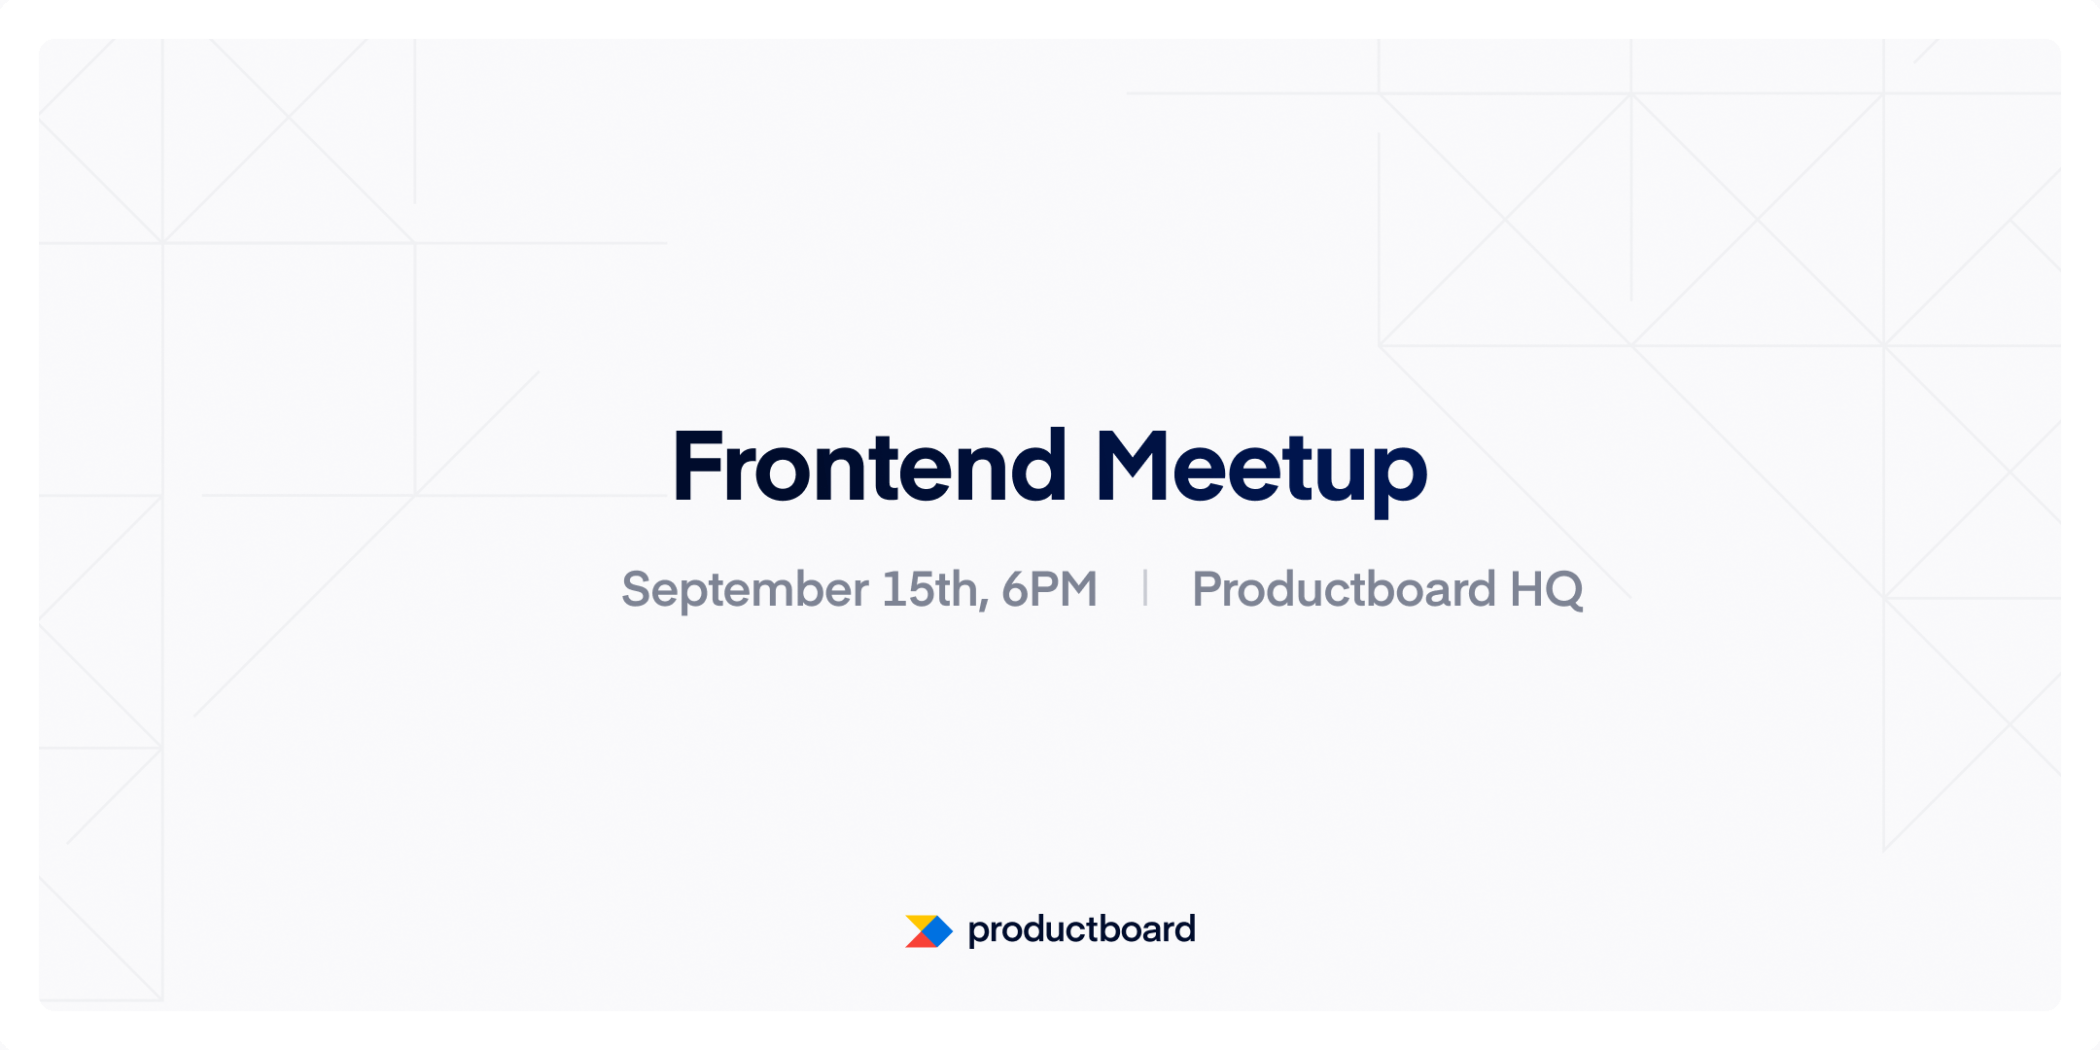 9/15/21 Frontend Meetup PRG